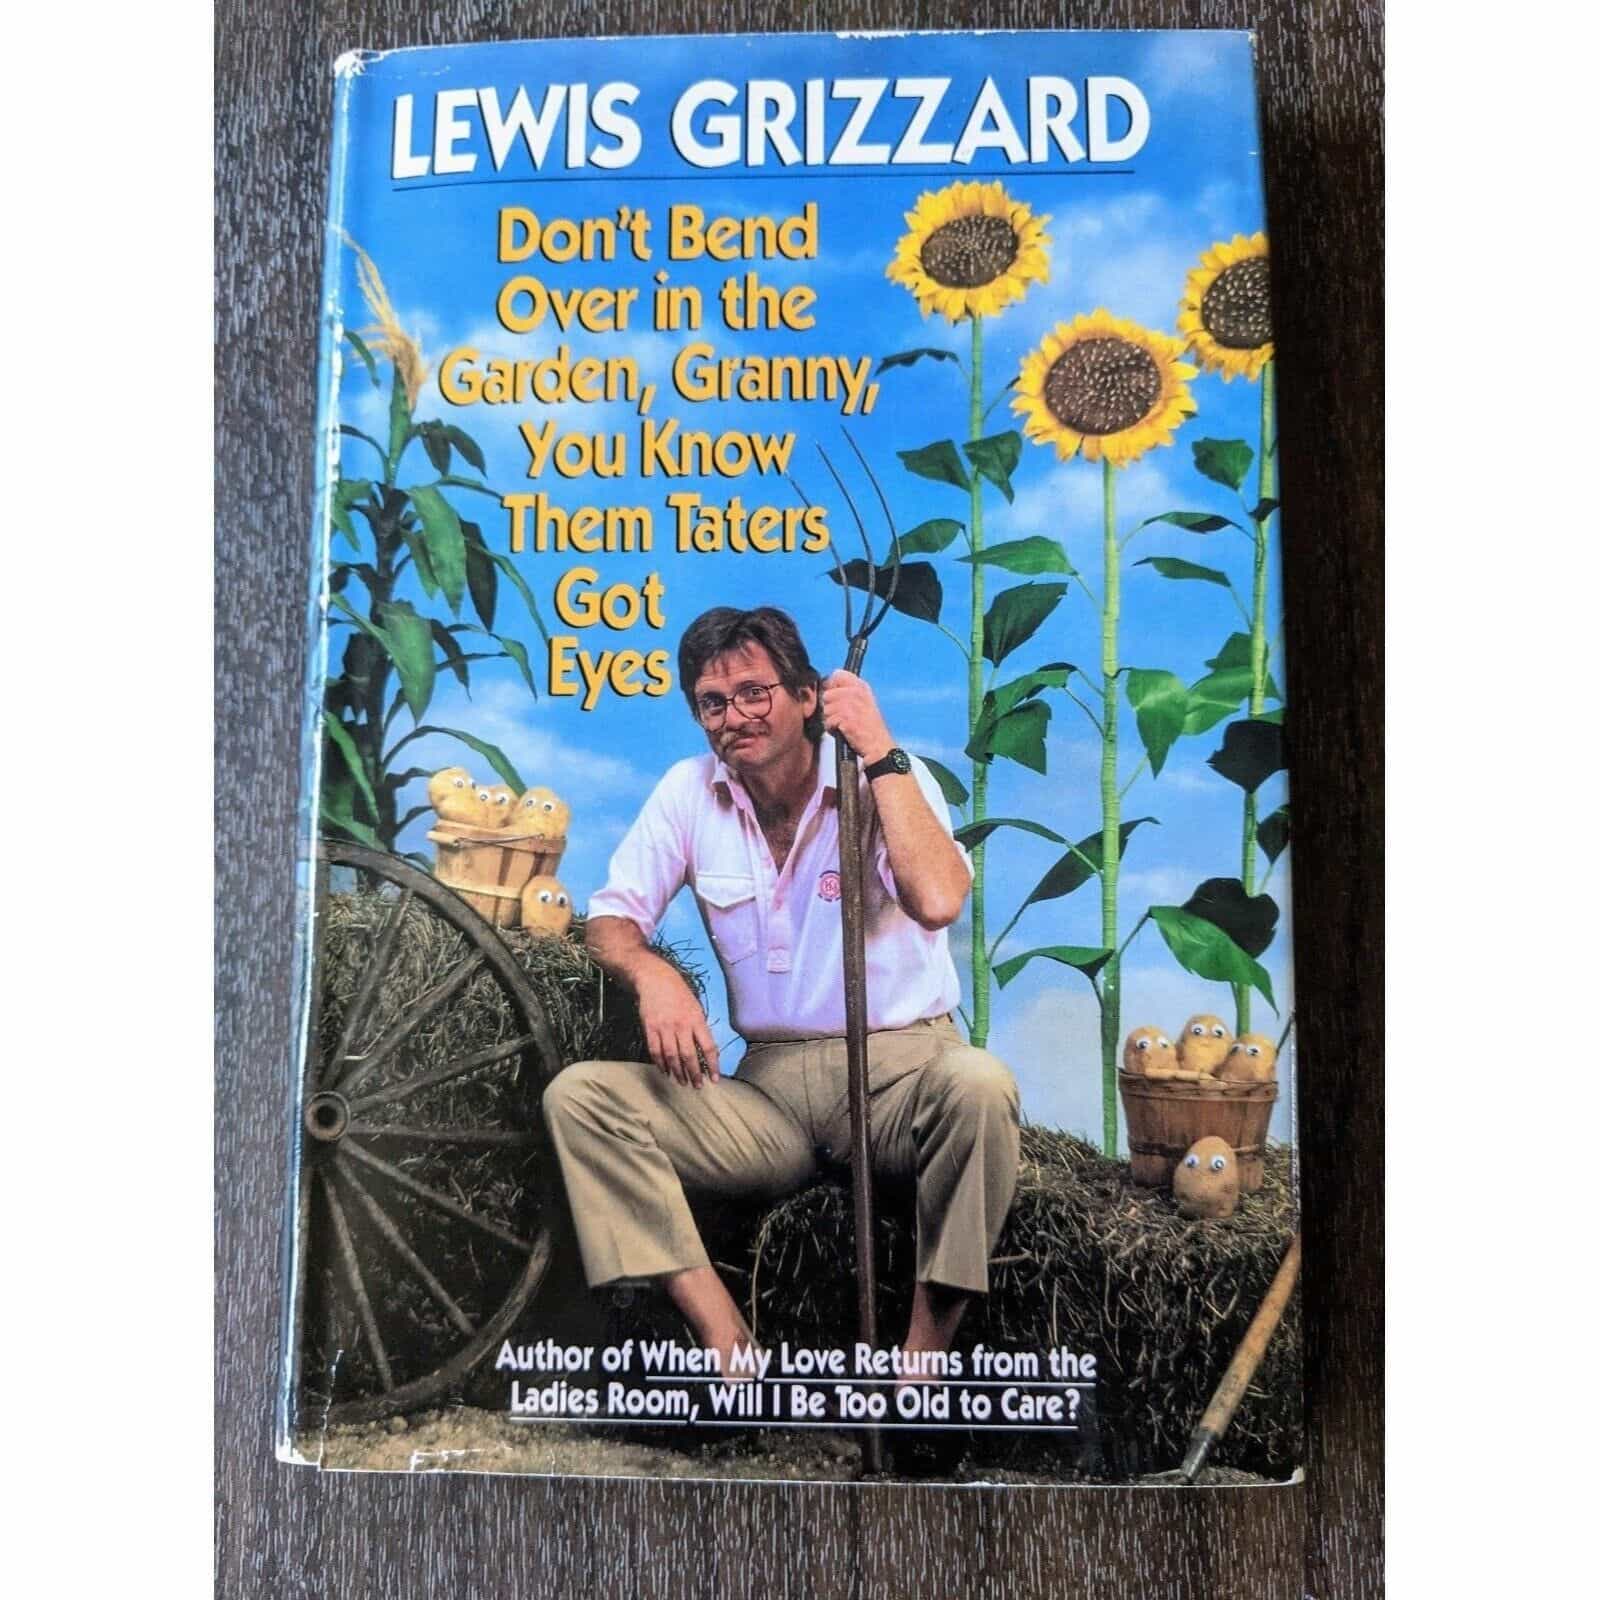 Don’t Bend Over in the Garden, Granny, You Know Them Taters… by Lewis Grizzard